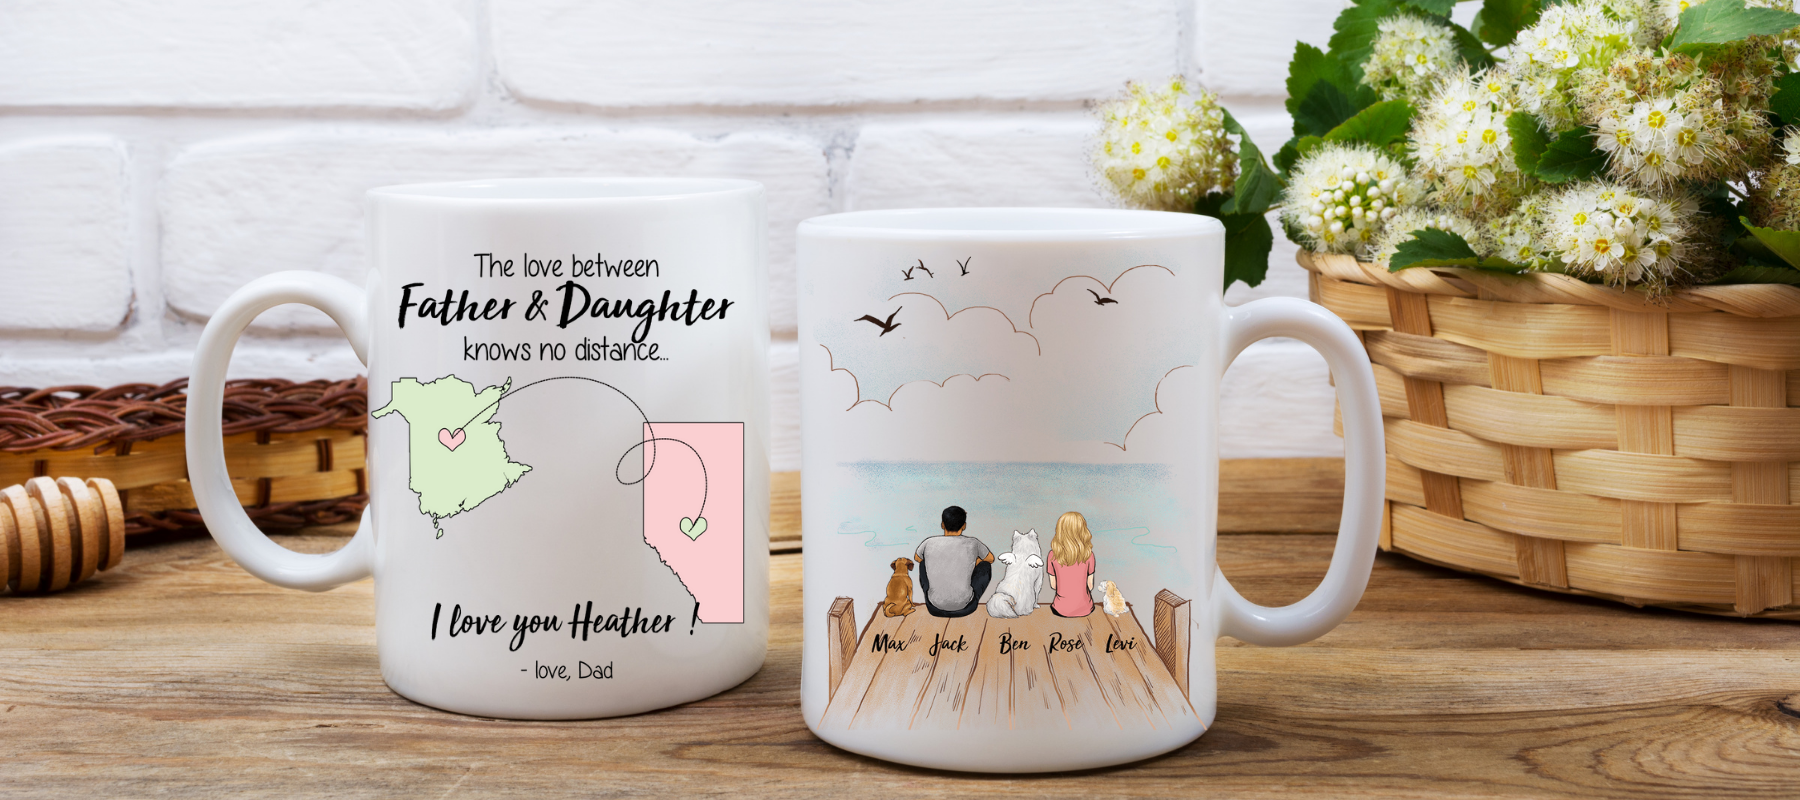 25 Amazing Dad Mug Gifts for Your Dad on Father’s Day